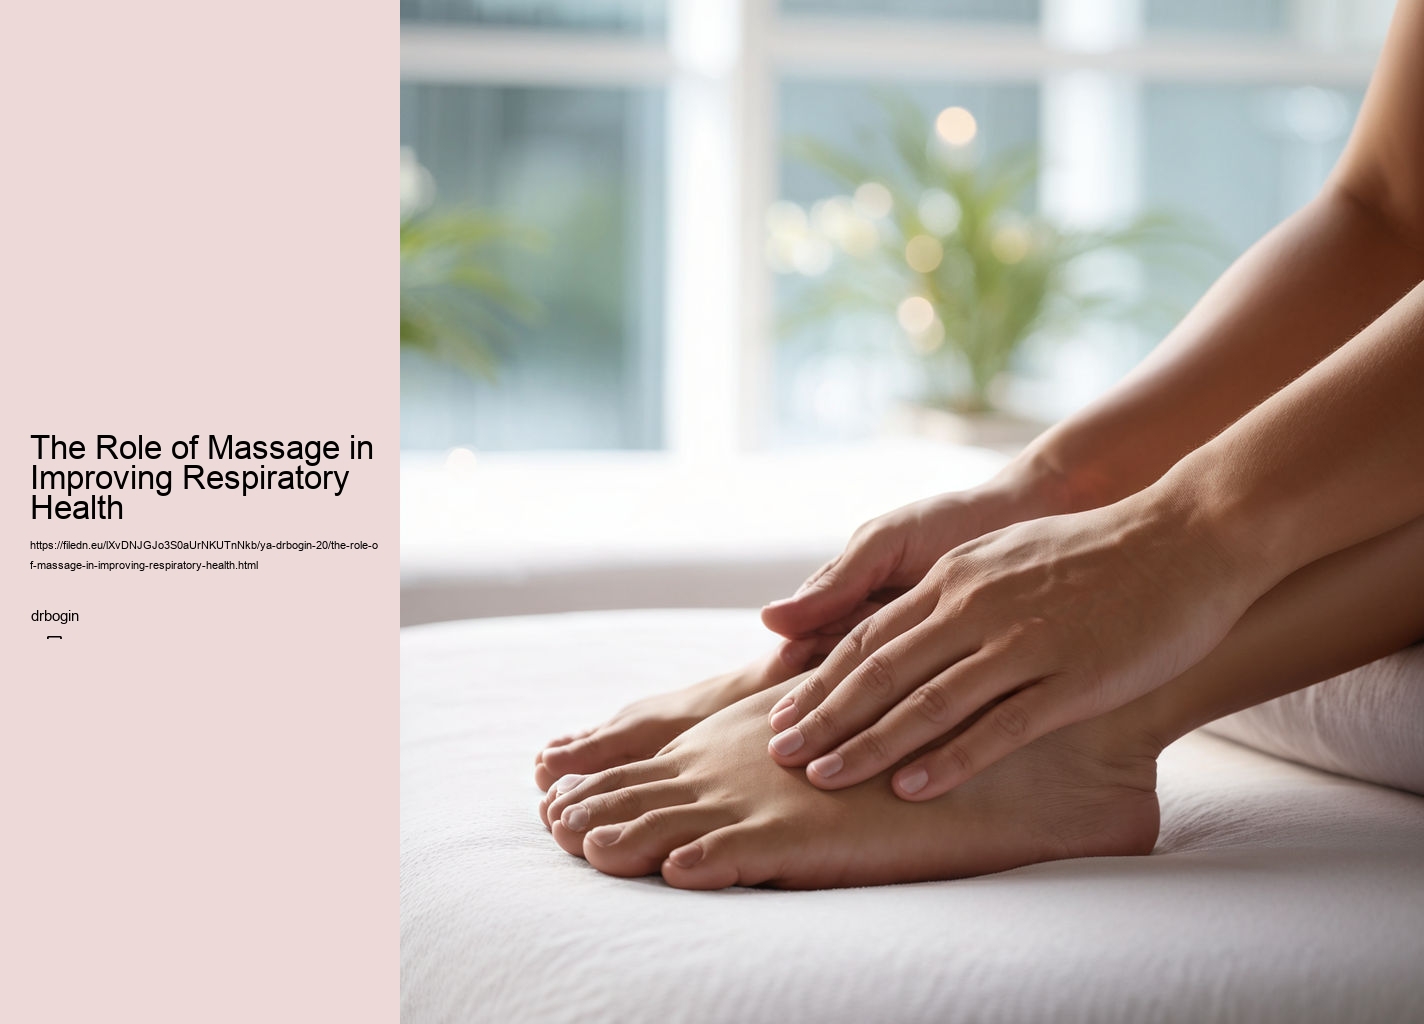 The Role of Massage in Improving Respiratory Health